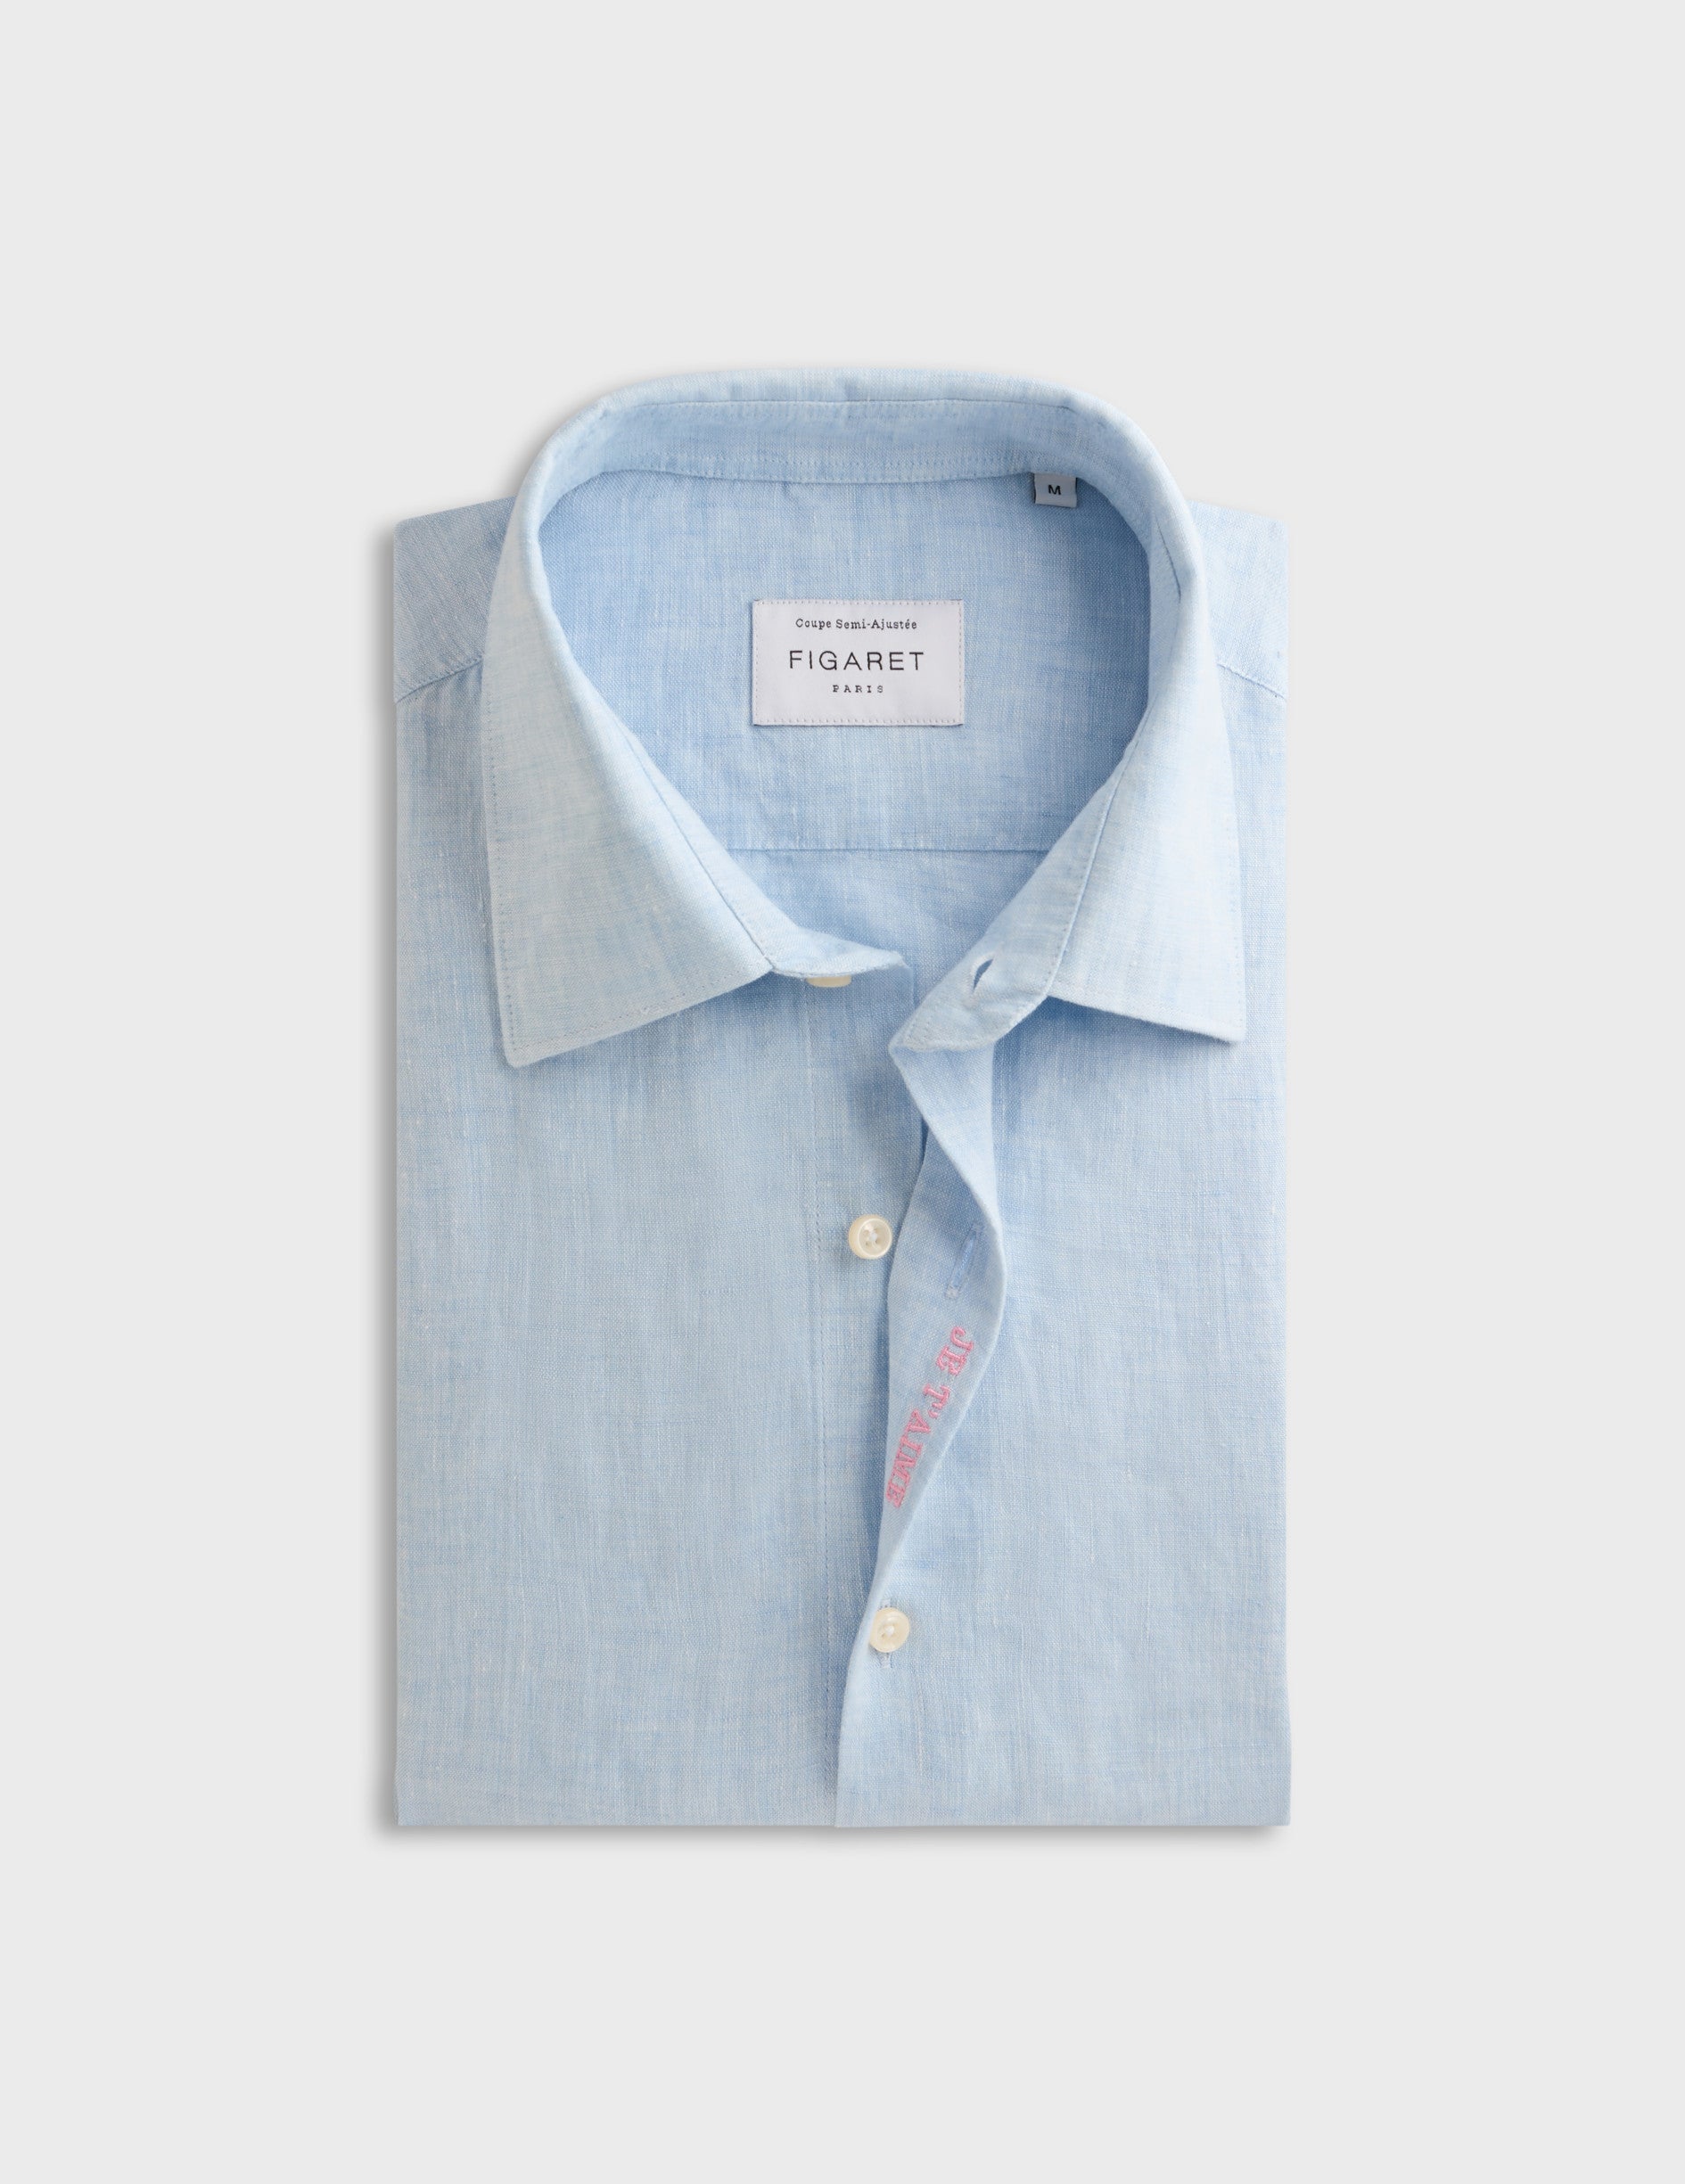 Blue unisex "je t'aime" shirt with pink embroidery - Linen - Figaret Collar